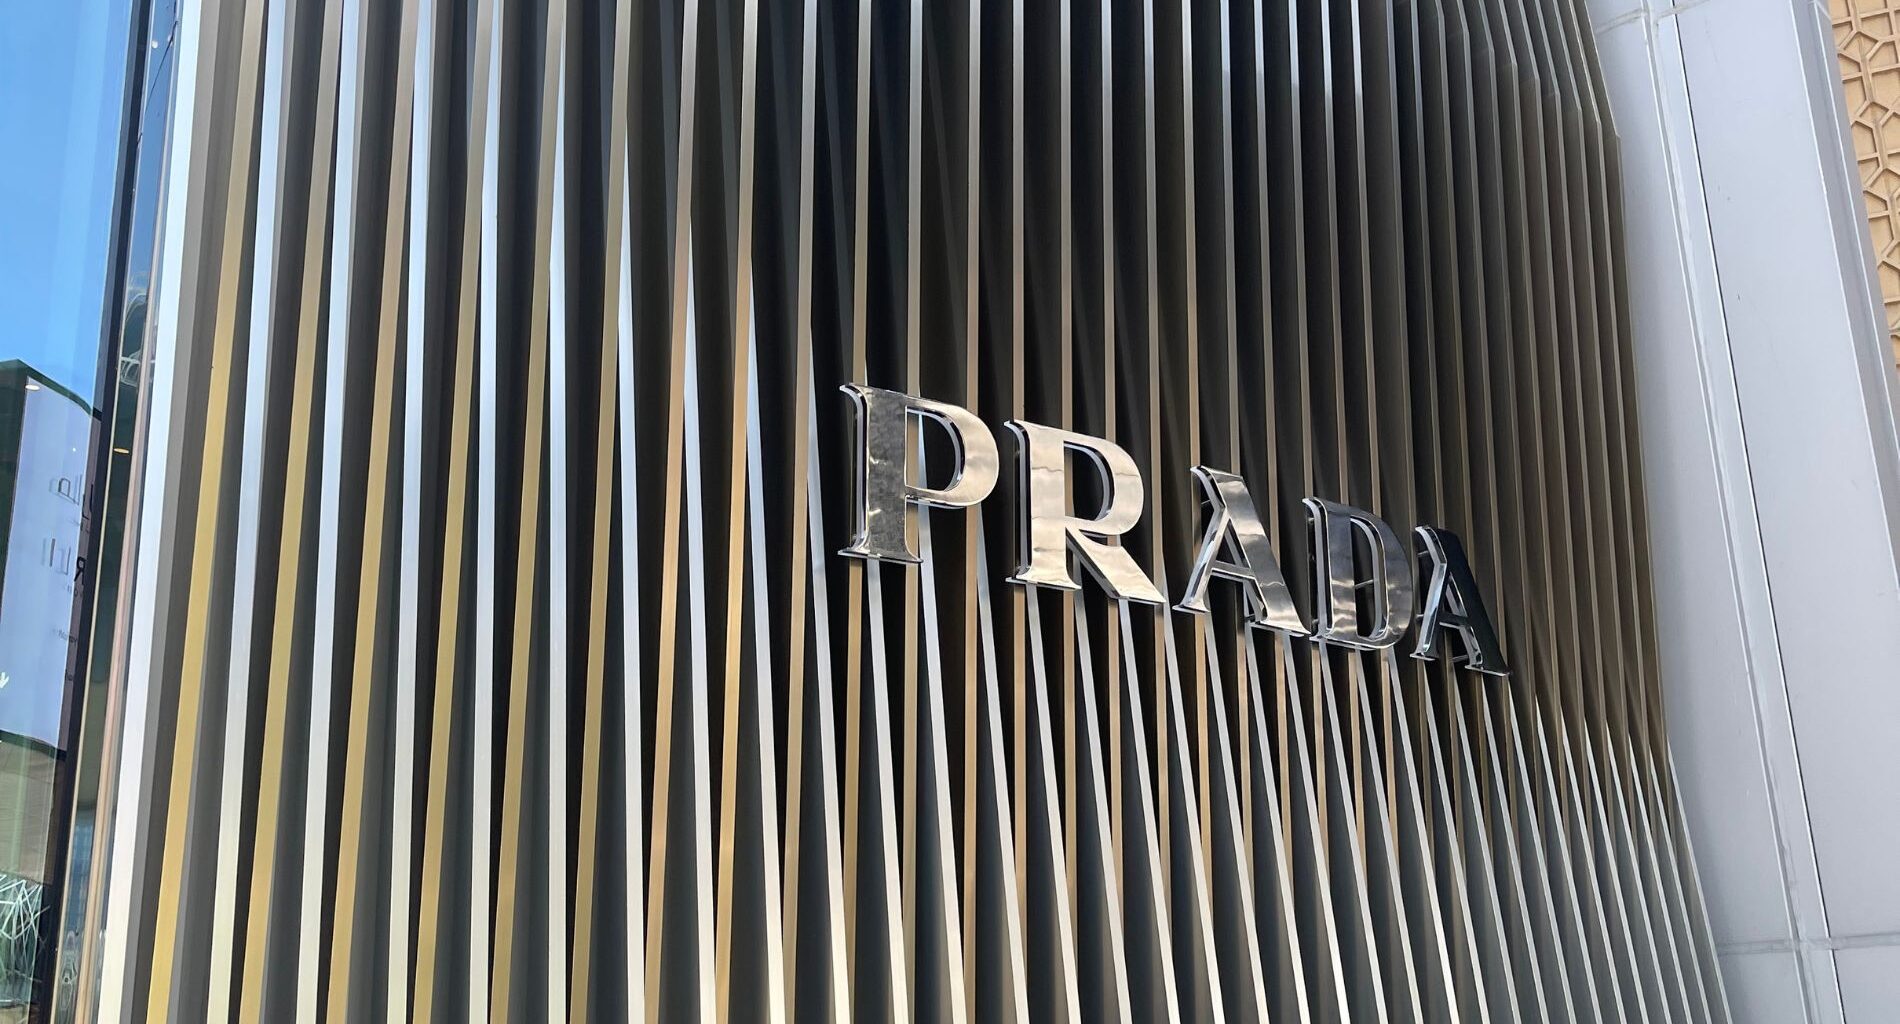 Which fashion brand is perceived as the most exclusive - Prada